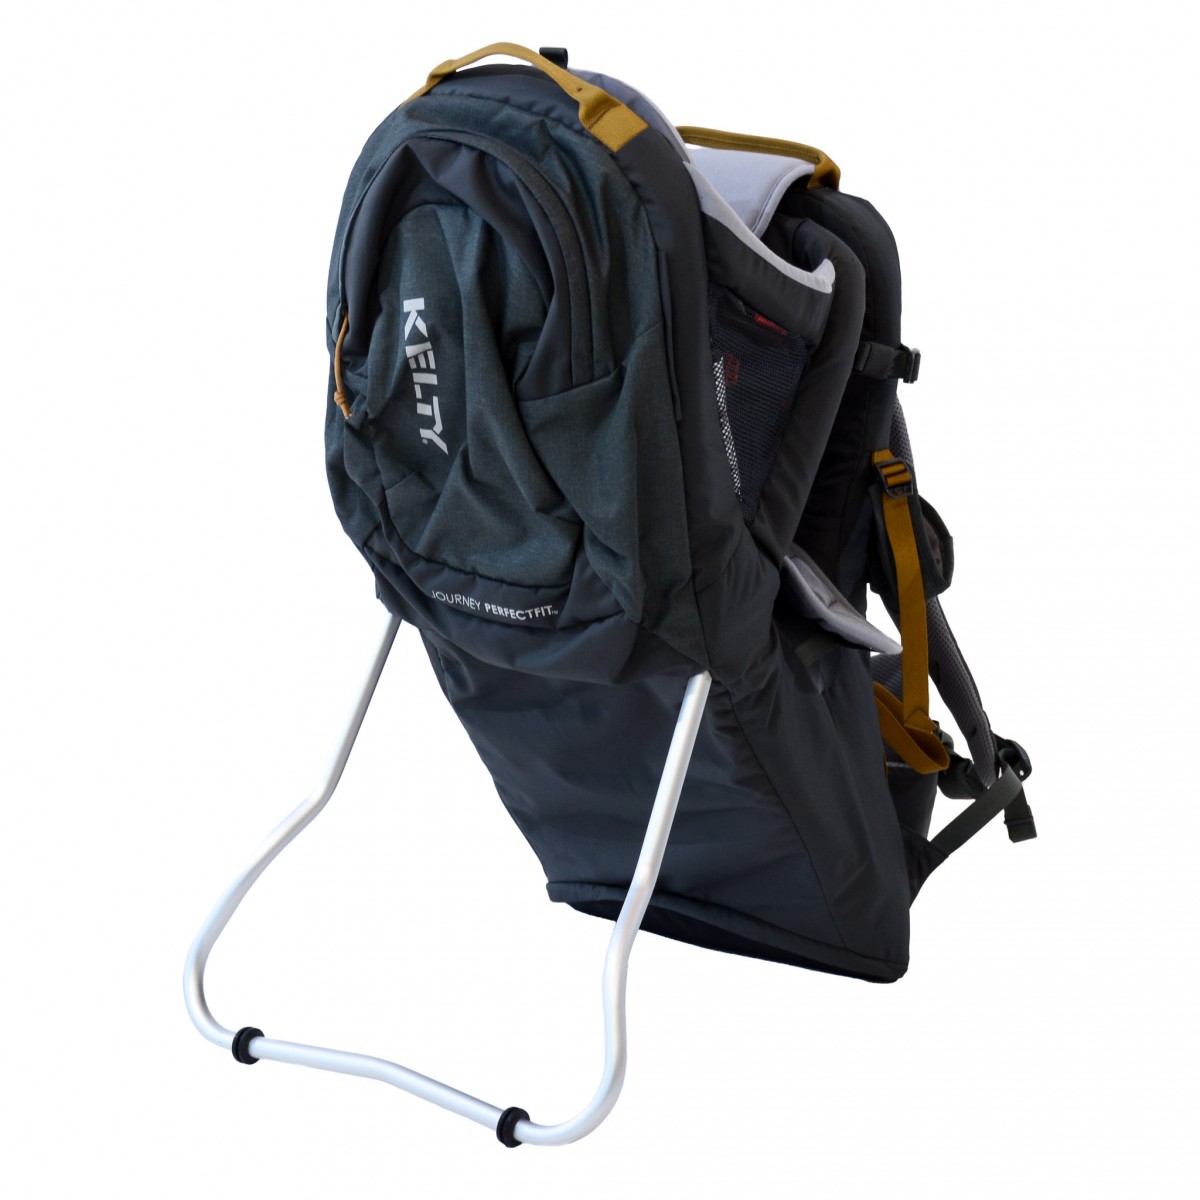 Kelty Journey PerfectFit Review